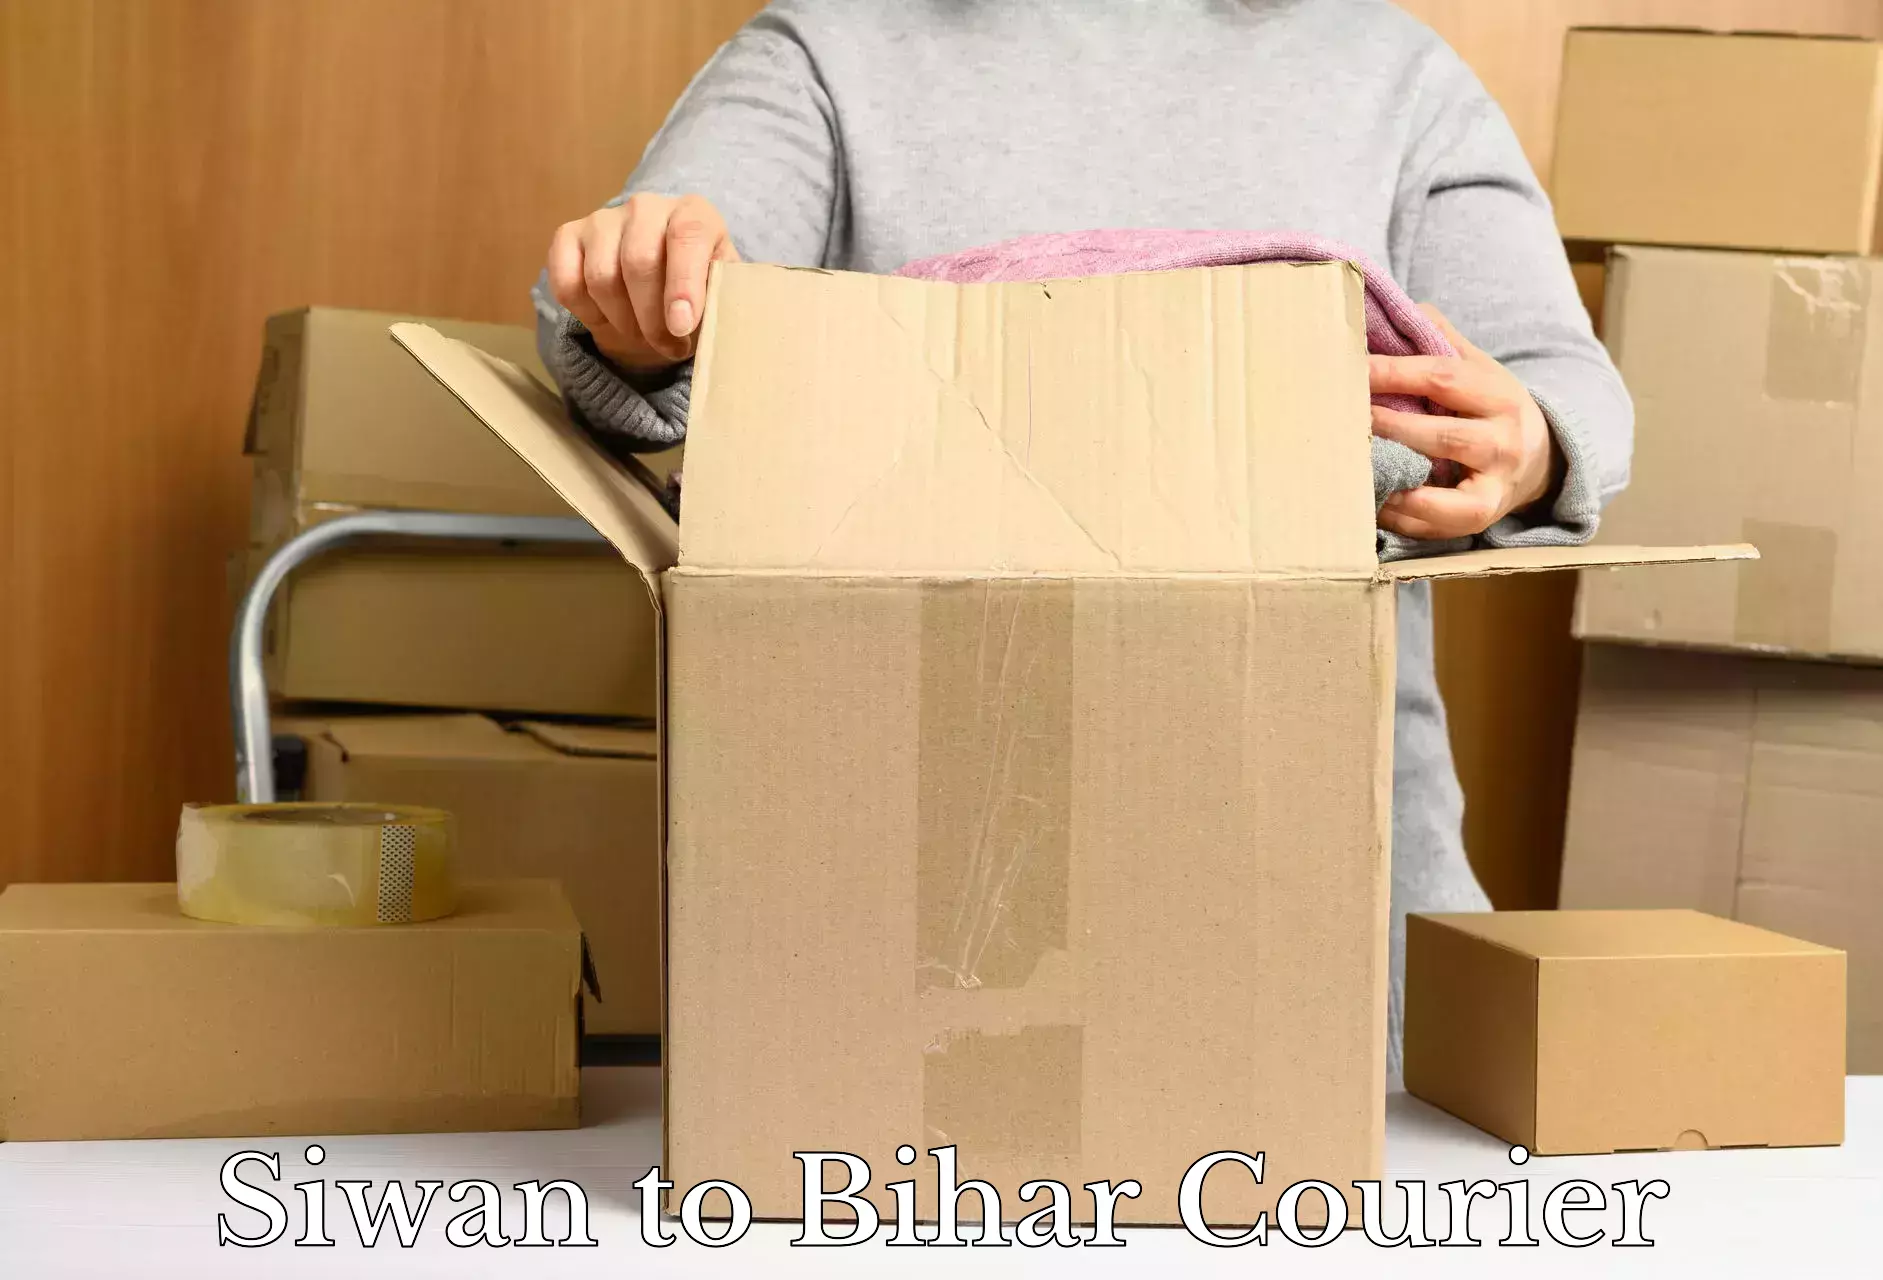 Furniture delivery service in Siwan to Bhagalpur